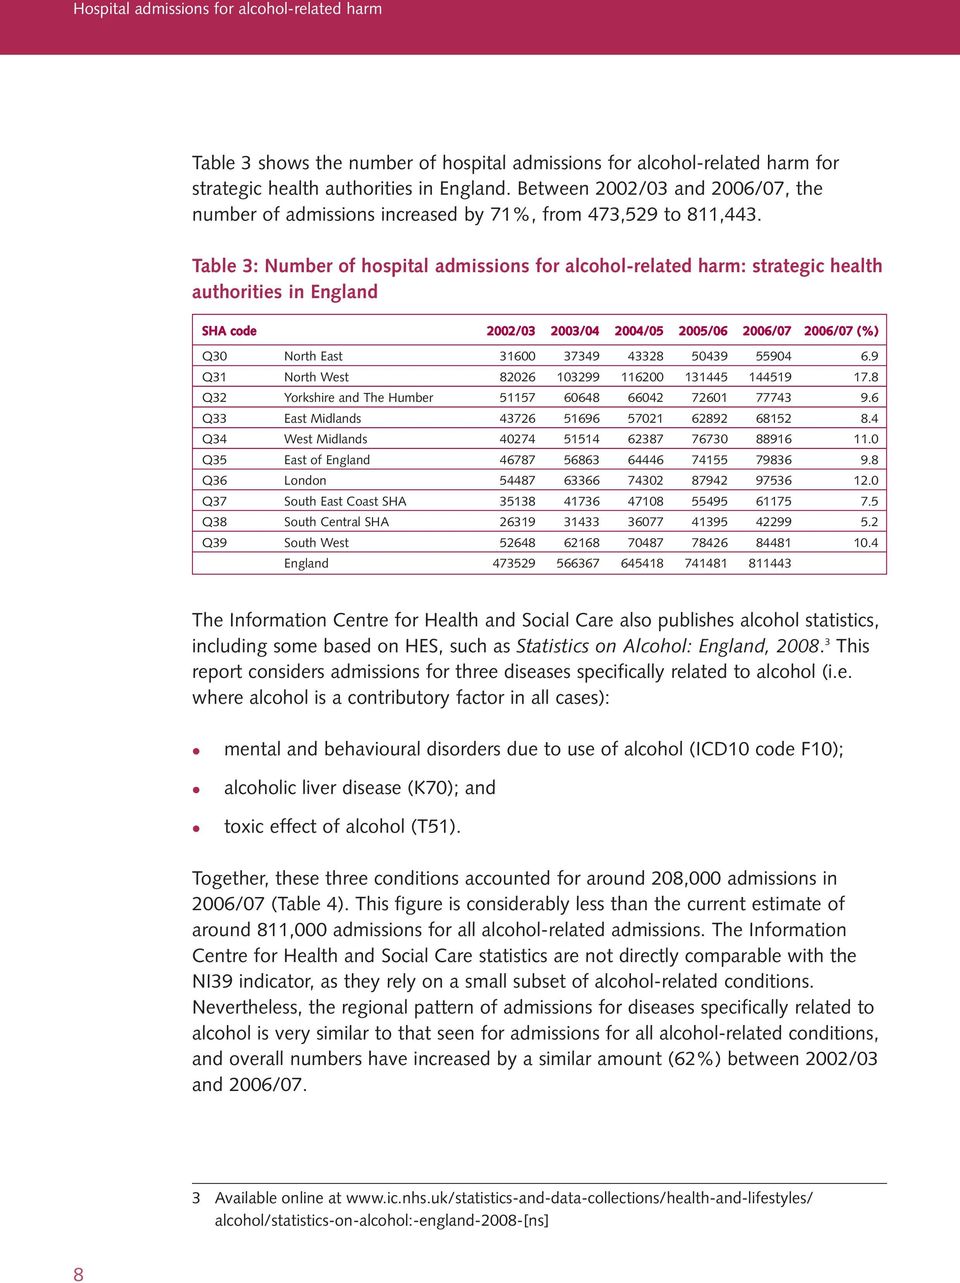 Table 3: Number of hospital admissions for alcohol-related harm: strategic health authorities in England SHA code 2002/03 2003/04 2004/05 2005/06 2006/07 2006/07 (%) Q30 North East 31600 37349 43328